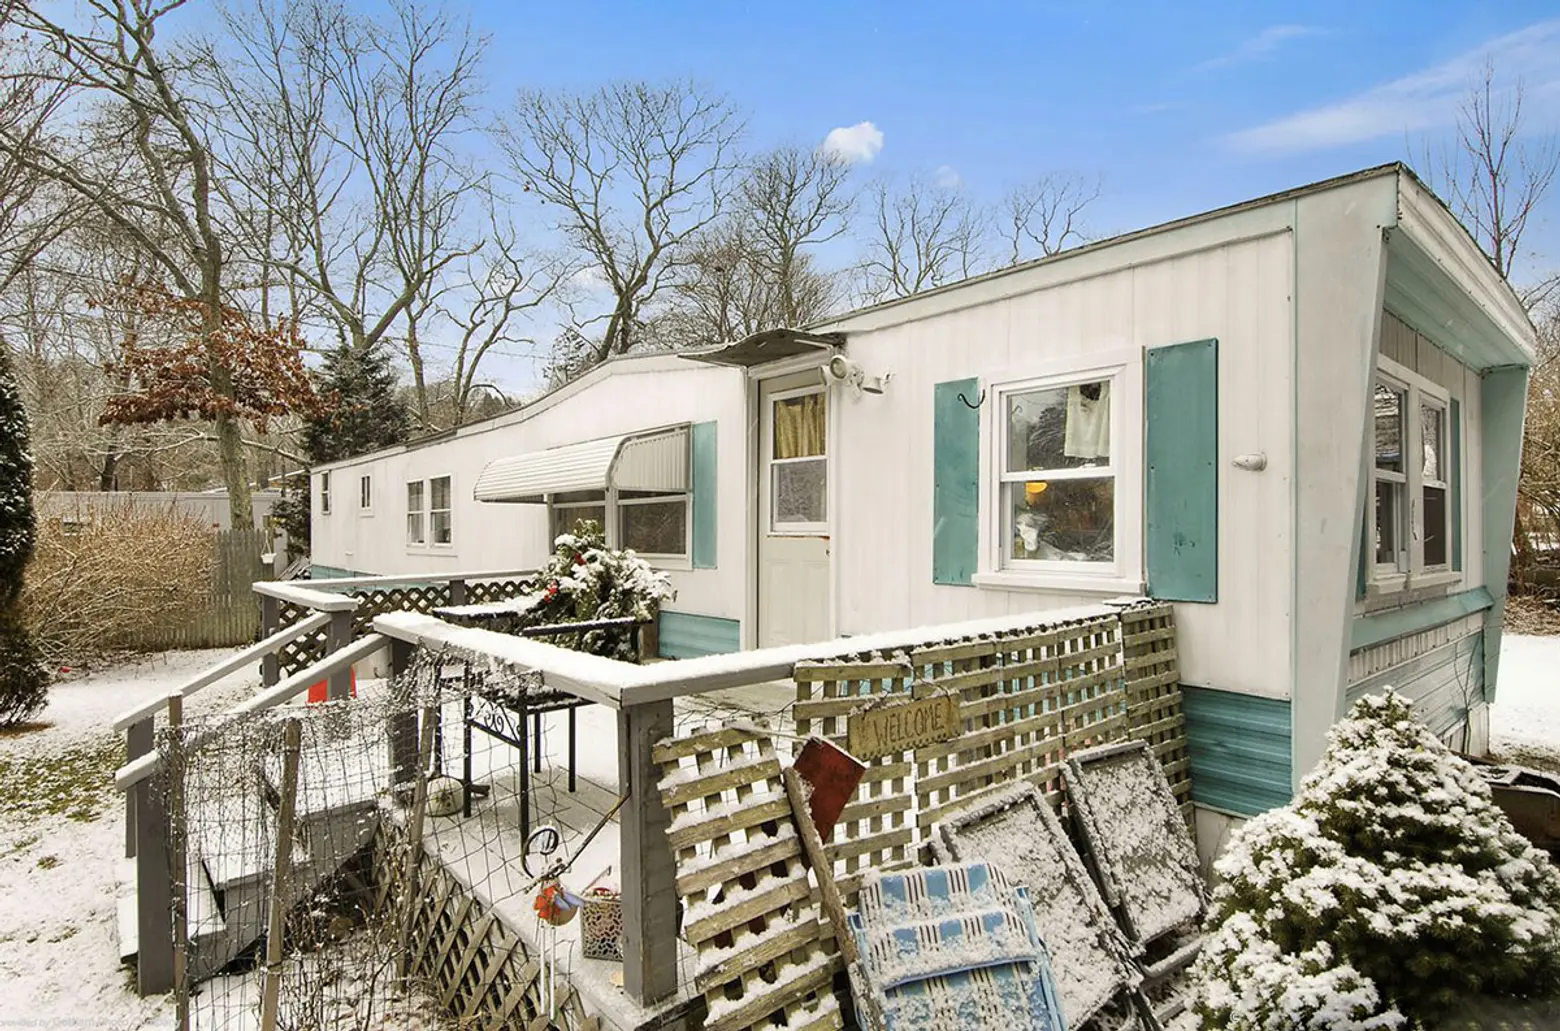 This Trailer Home in the Hamptons Wants $1.2 Million